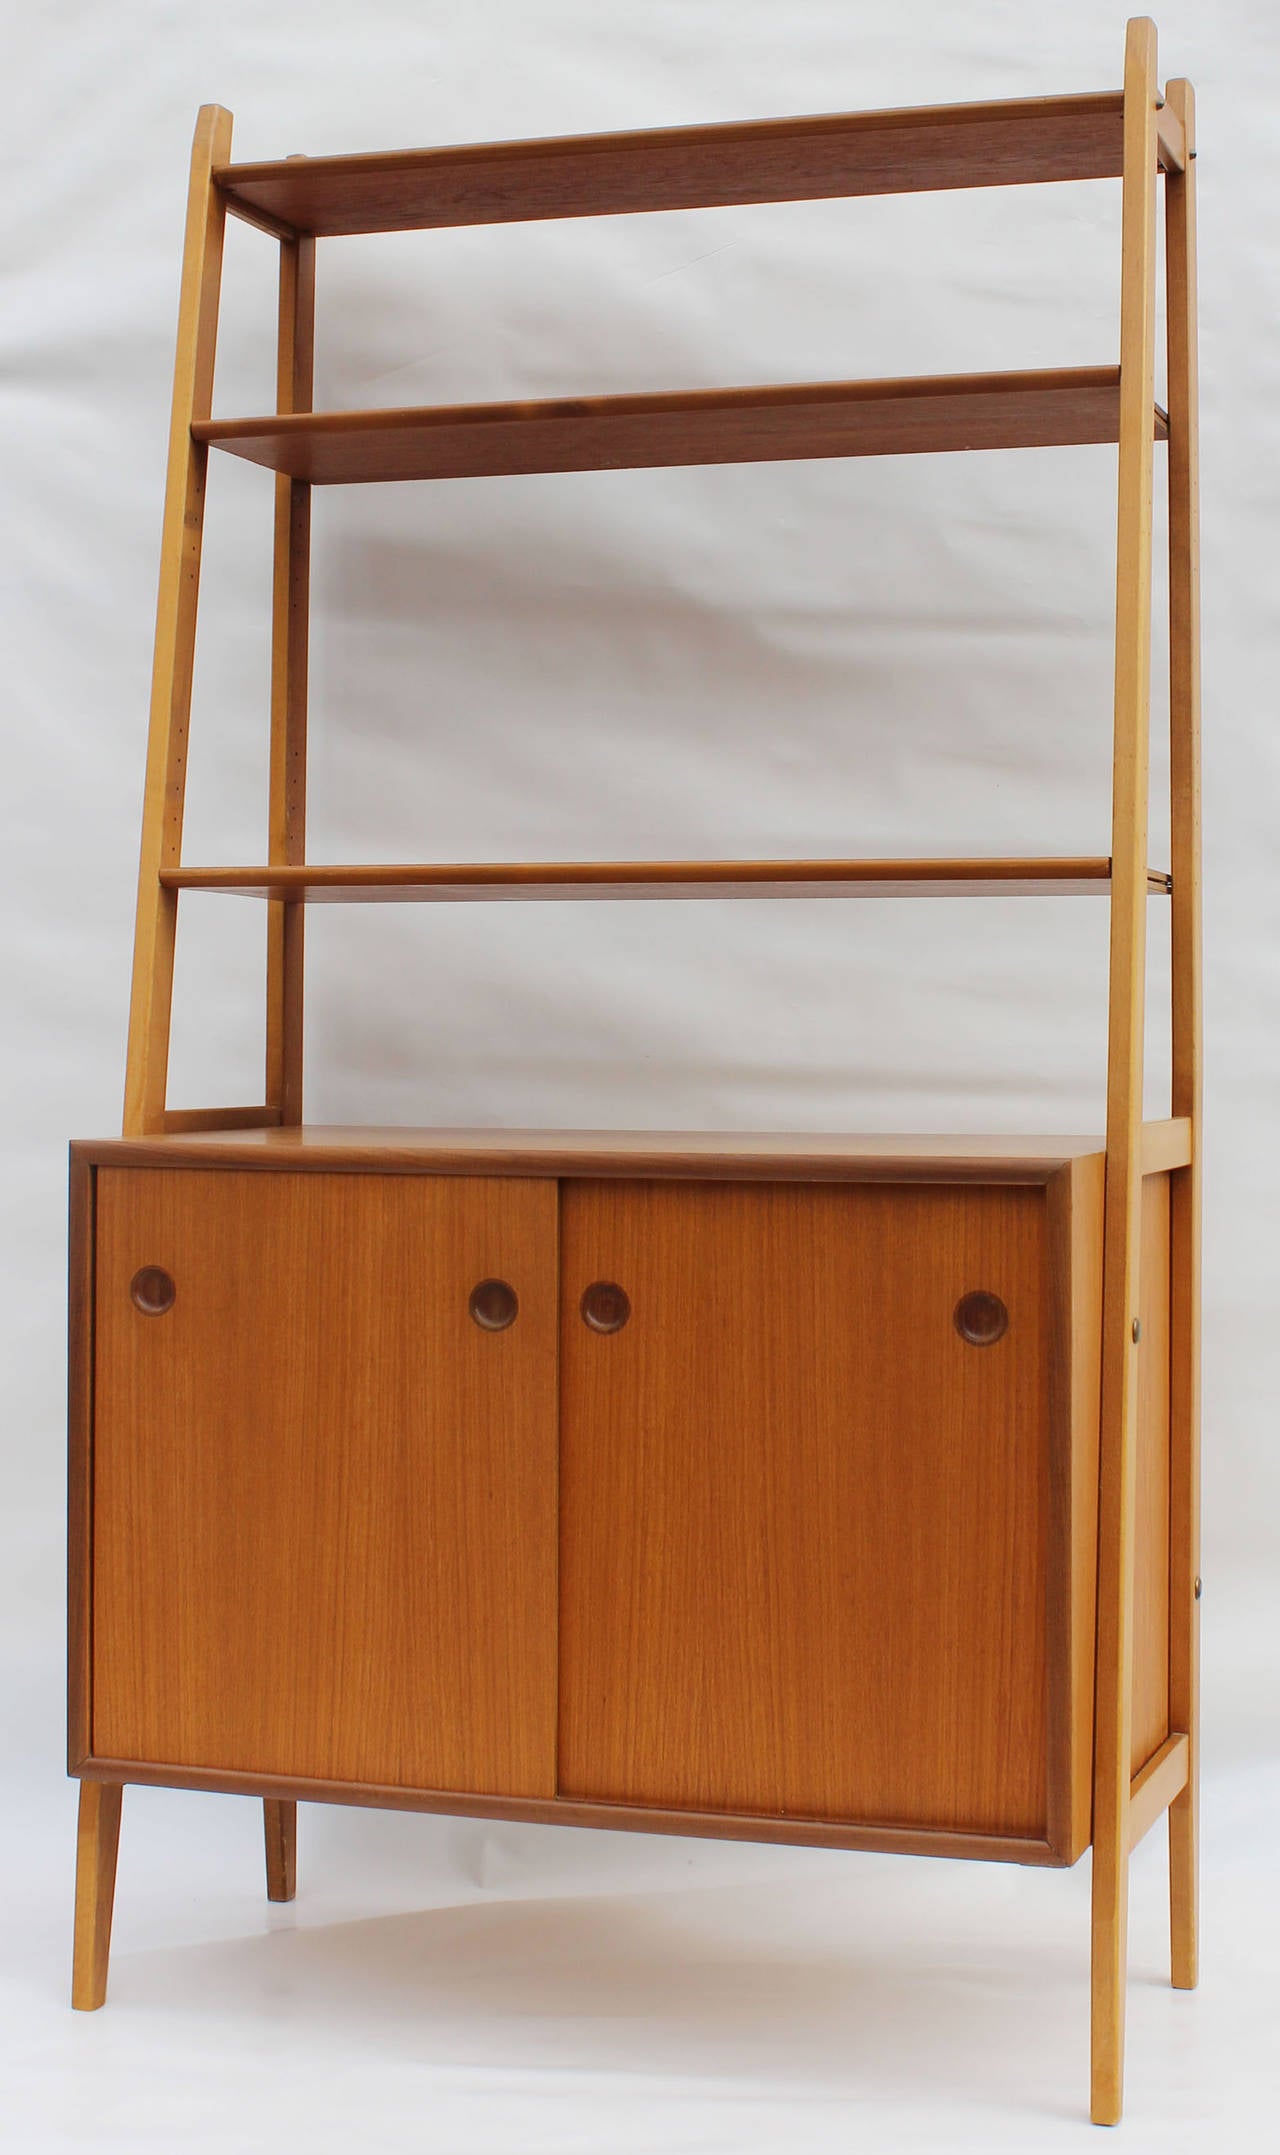 A pair of Swedish teak cabinets with adjustable shelves.